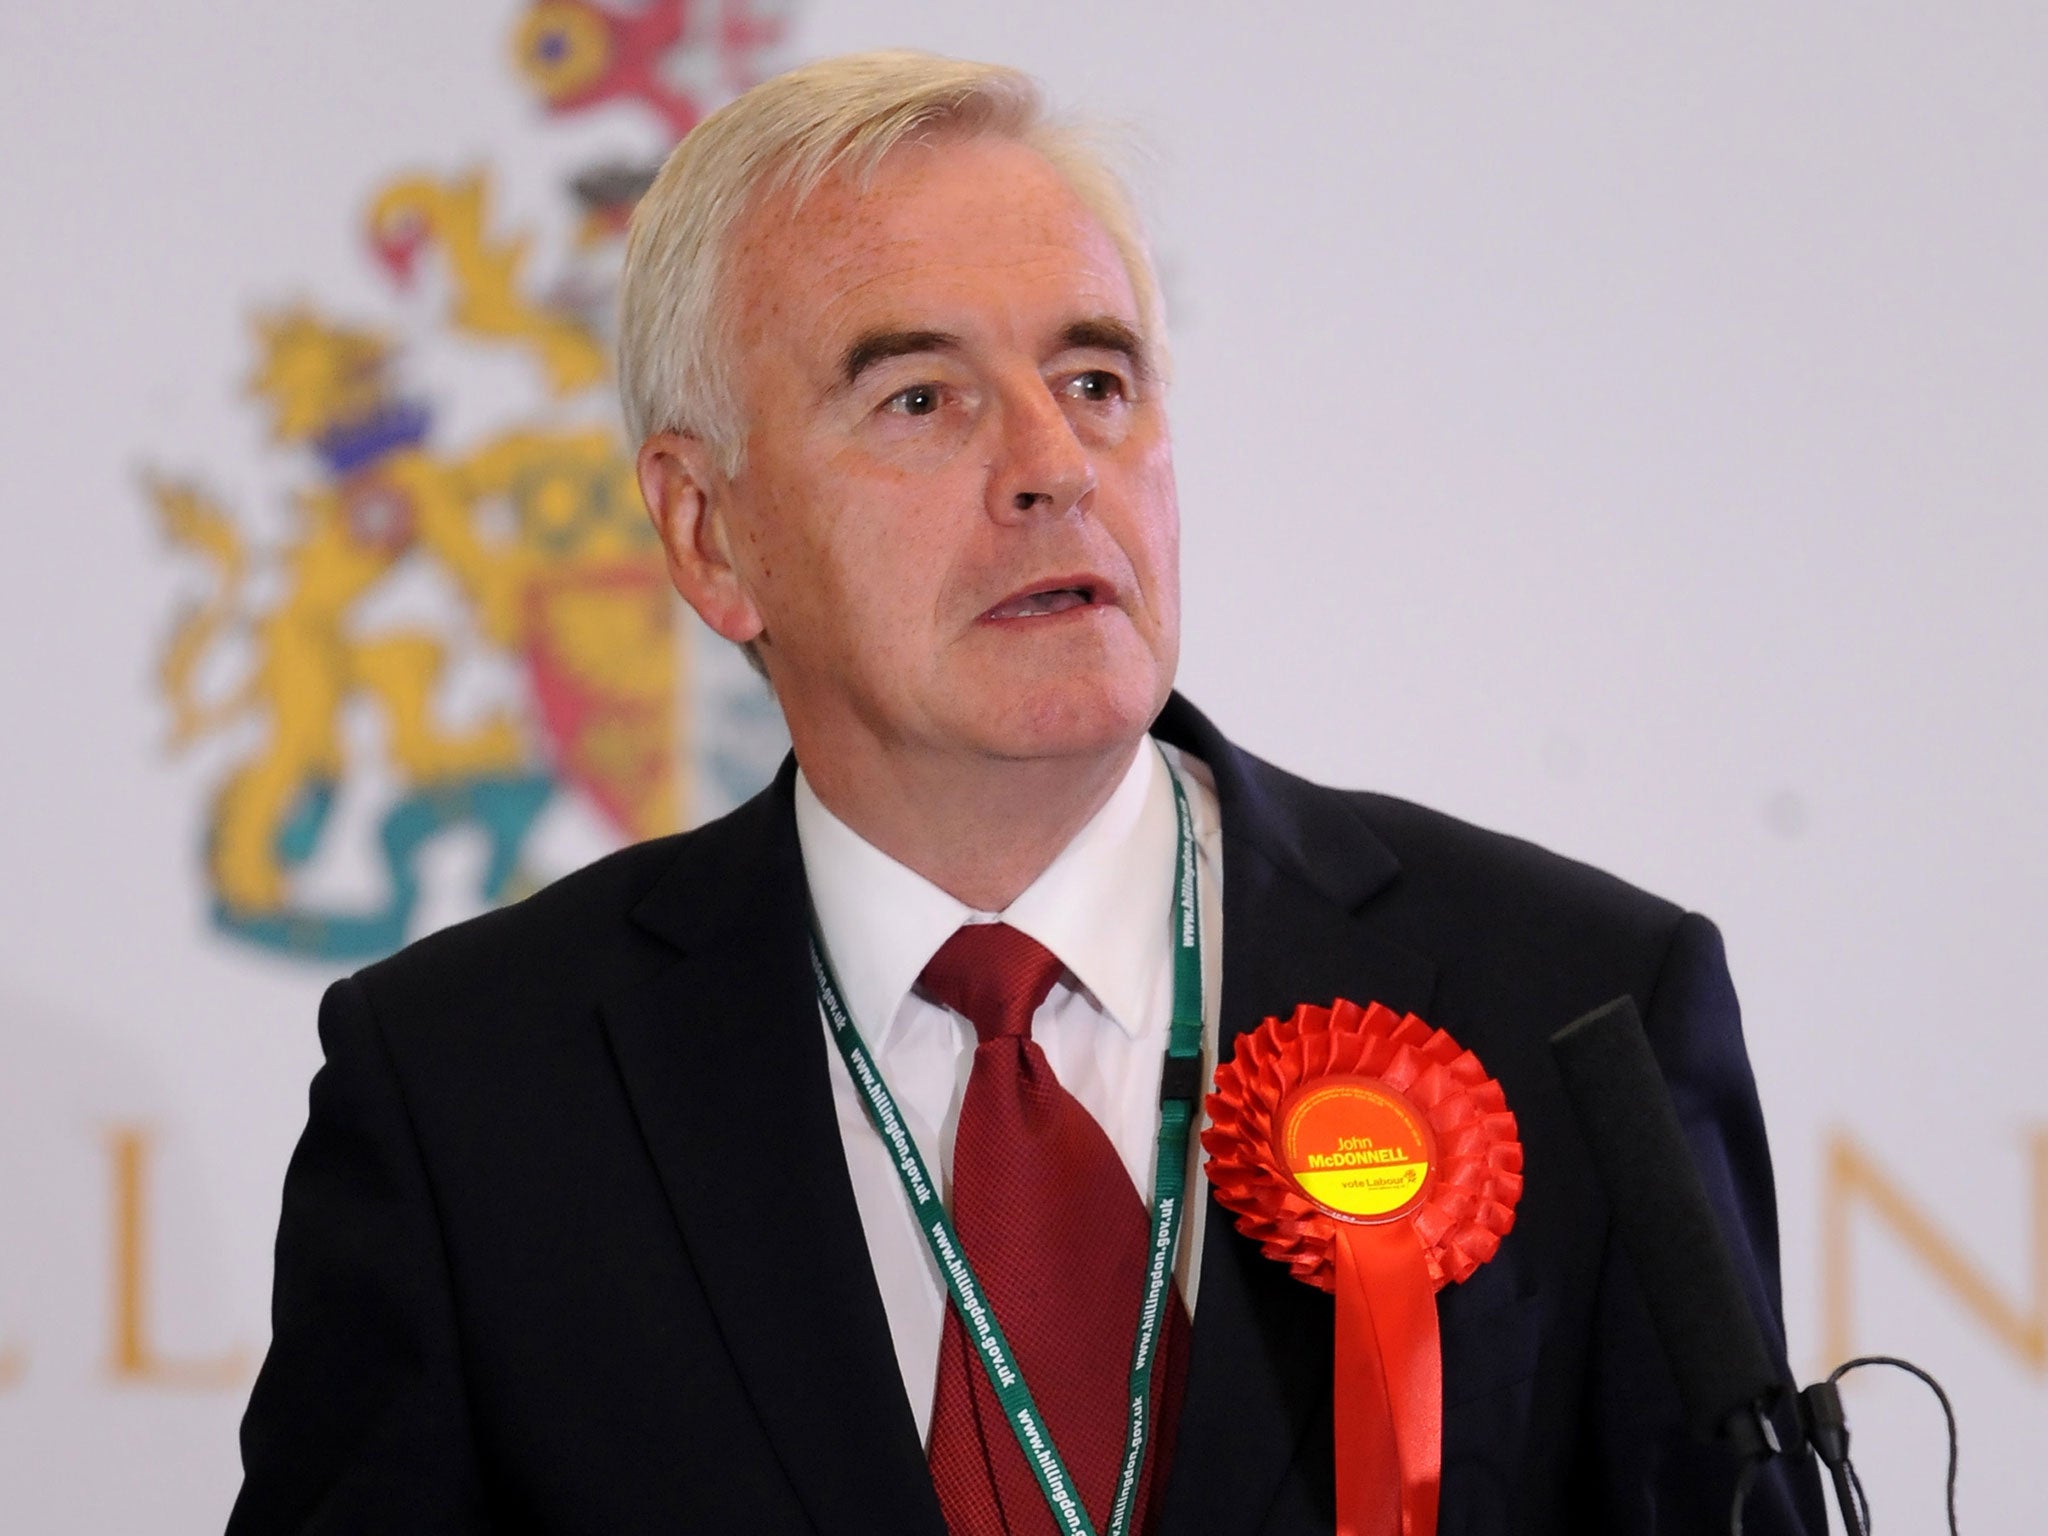 John McDonnell, a veteran left-winger and Mr Corbyn’s campaign agent, was announced as Shadow Chancellor